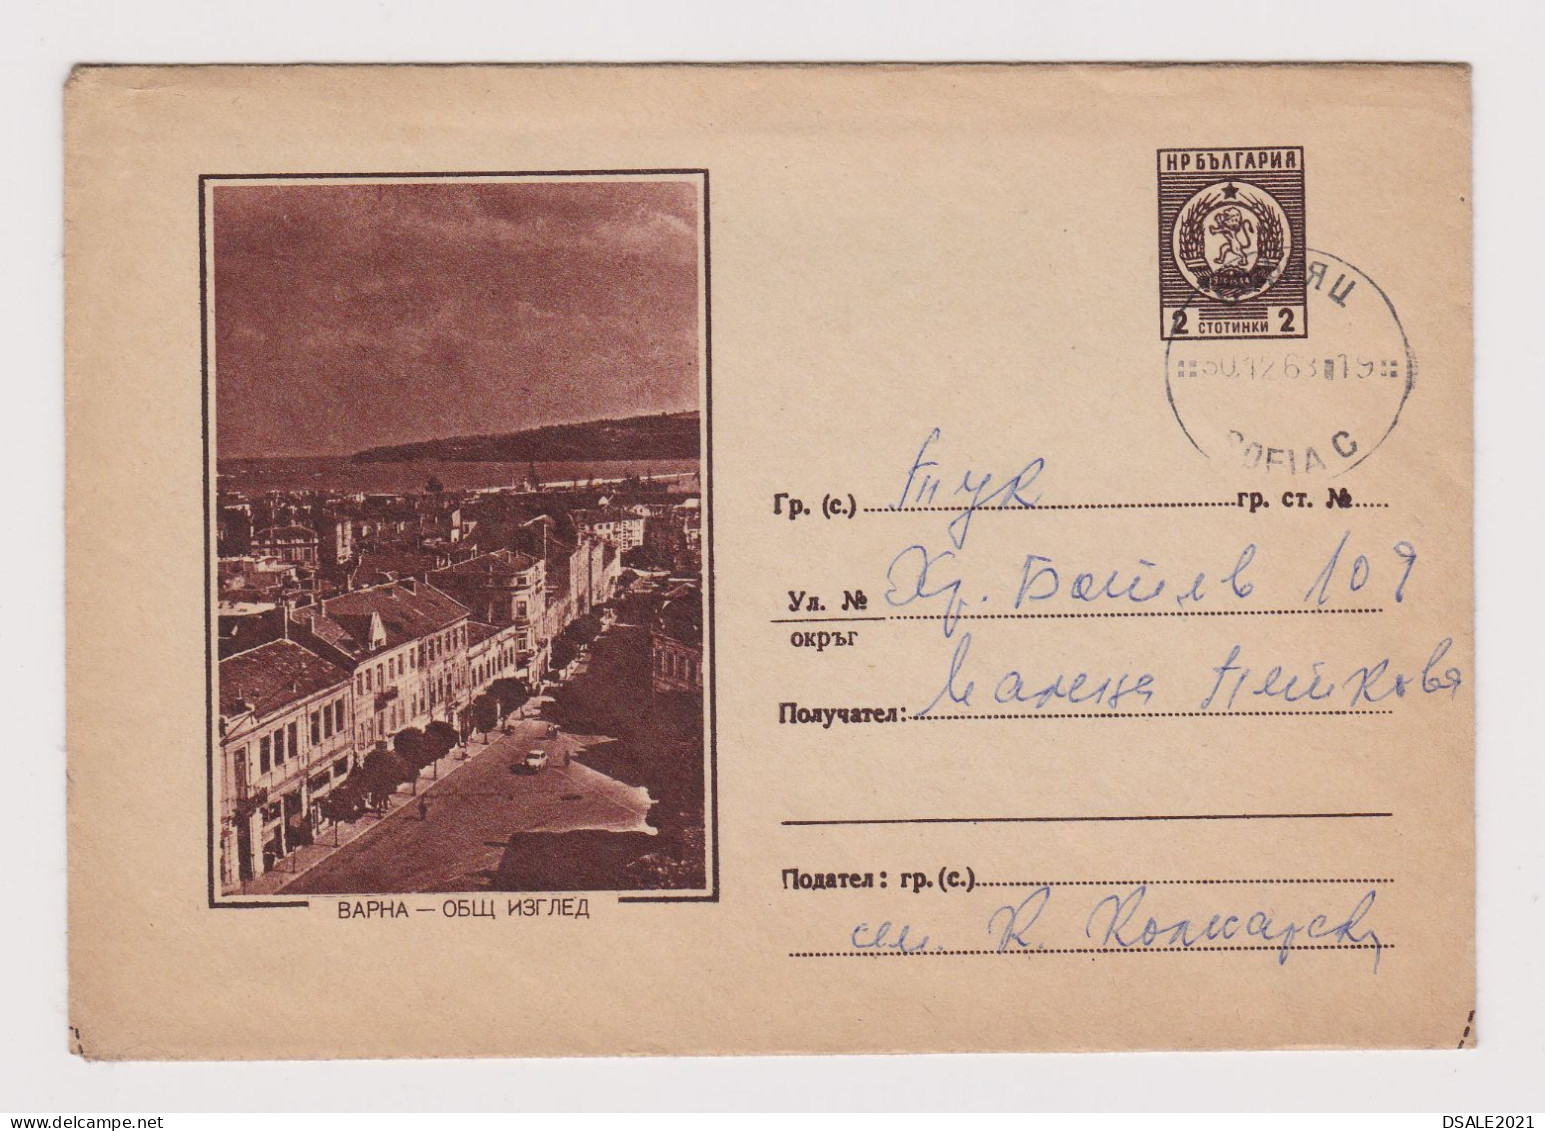 Bulgaria Bulgarie Bulgarien 1962 Postal Stationery Cover PSE, Entier, Ganzsachen, Topic City VARNA-Downtown (68212) - Covers